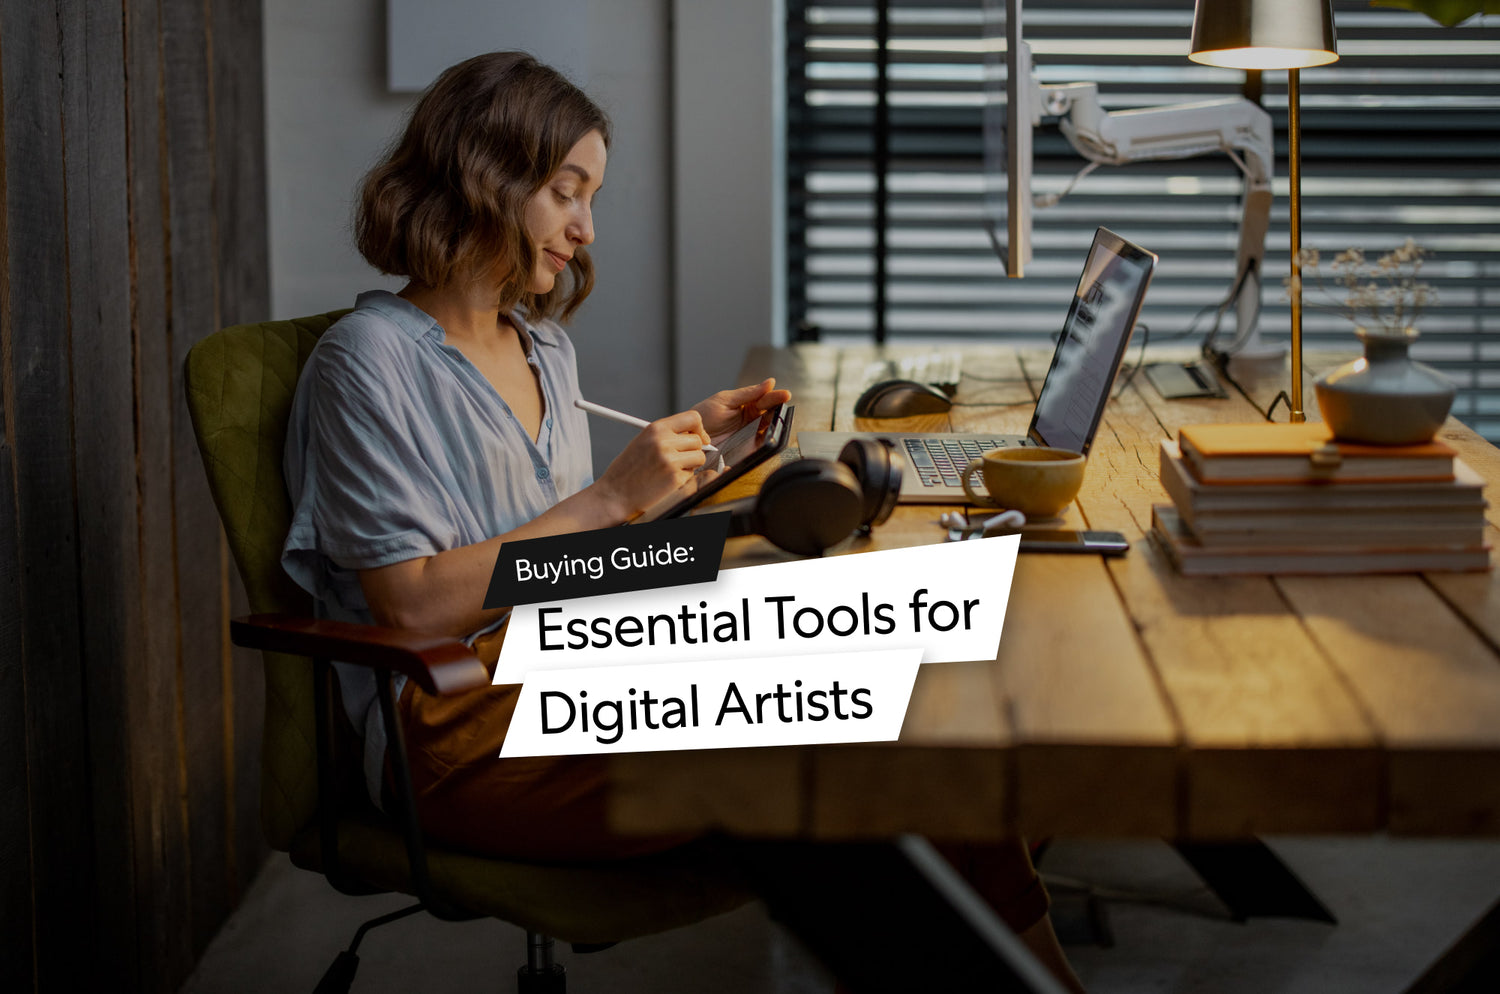 Buying Guide: Essential Tools for Digital Artists